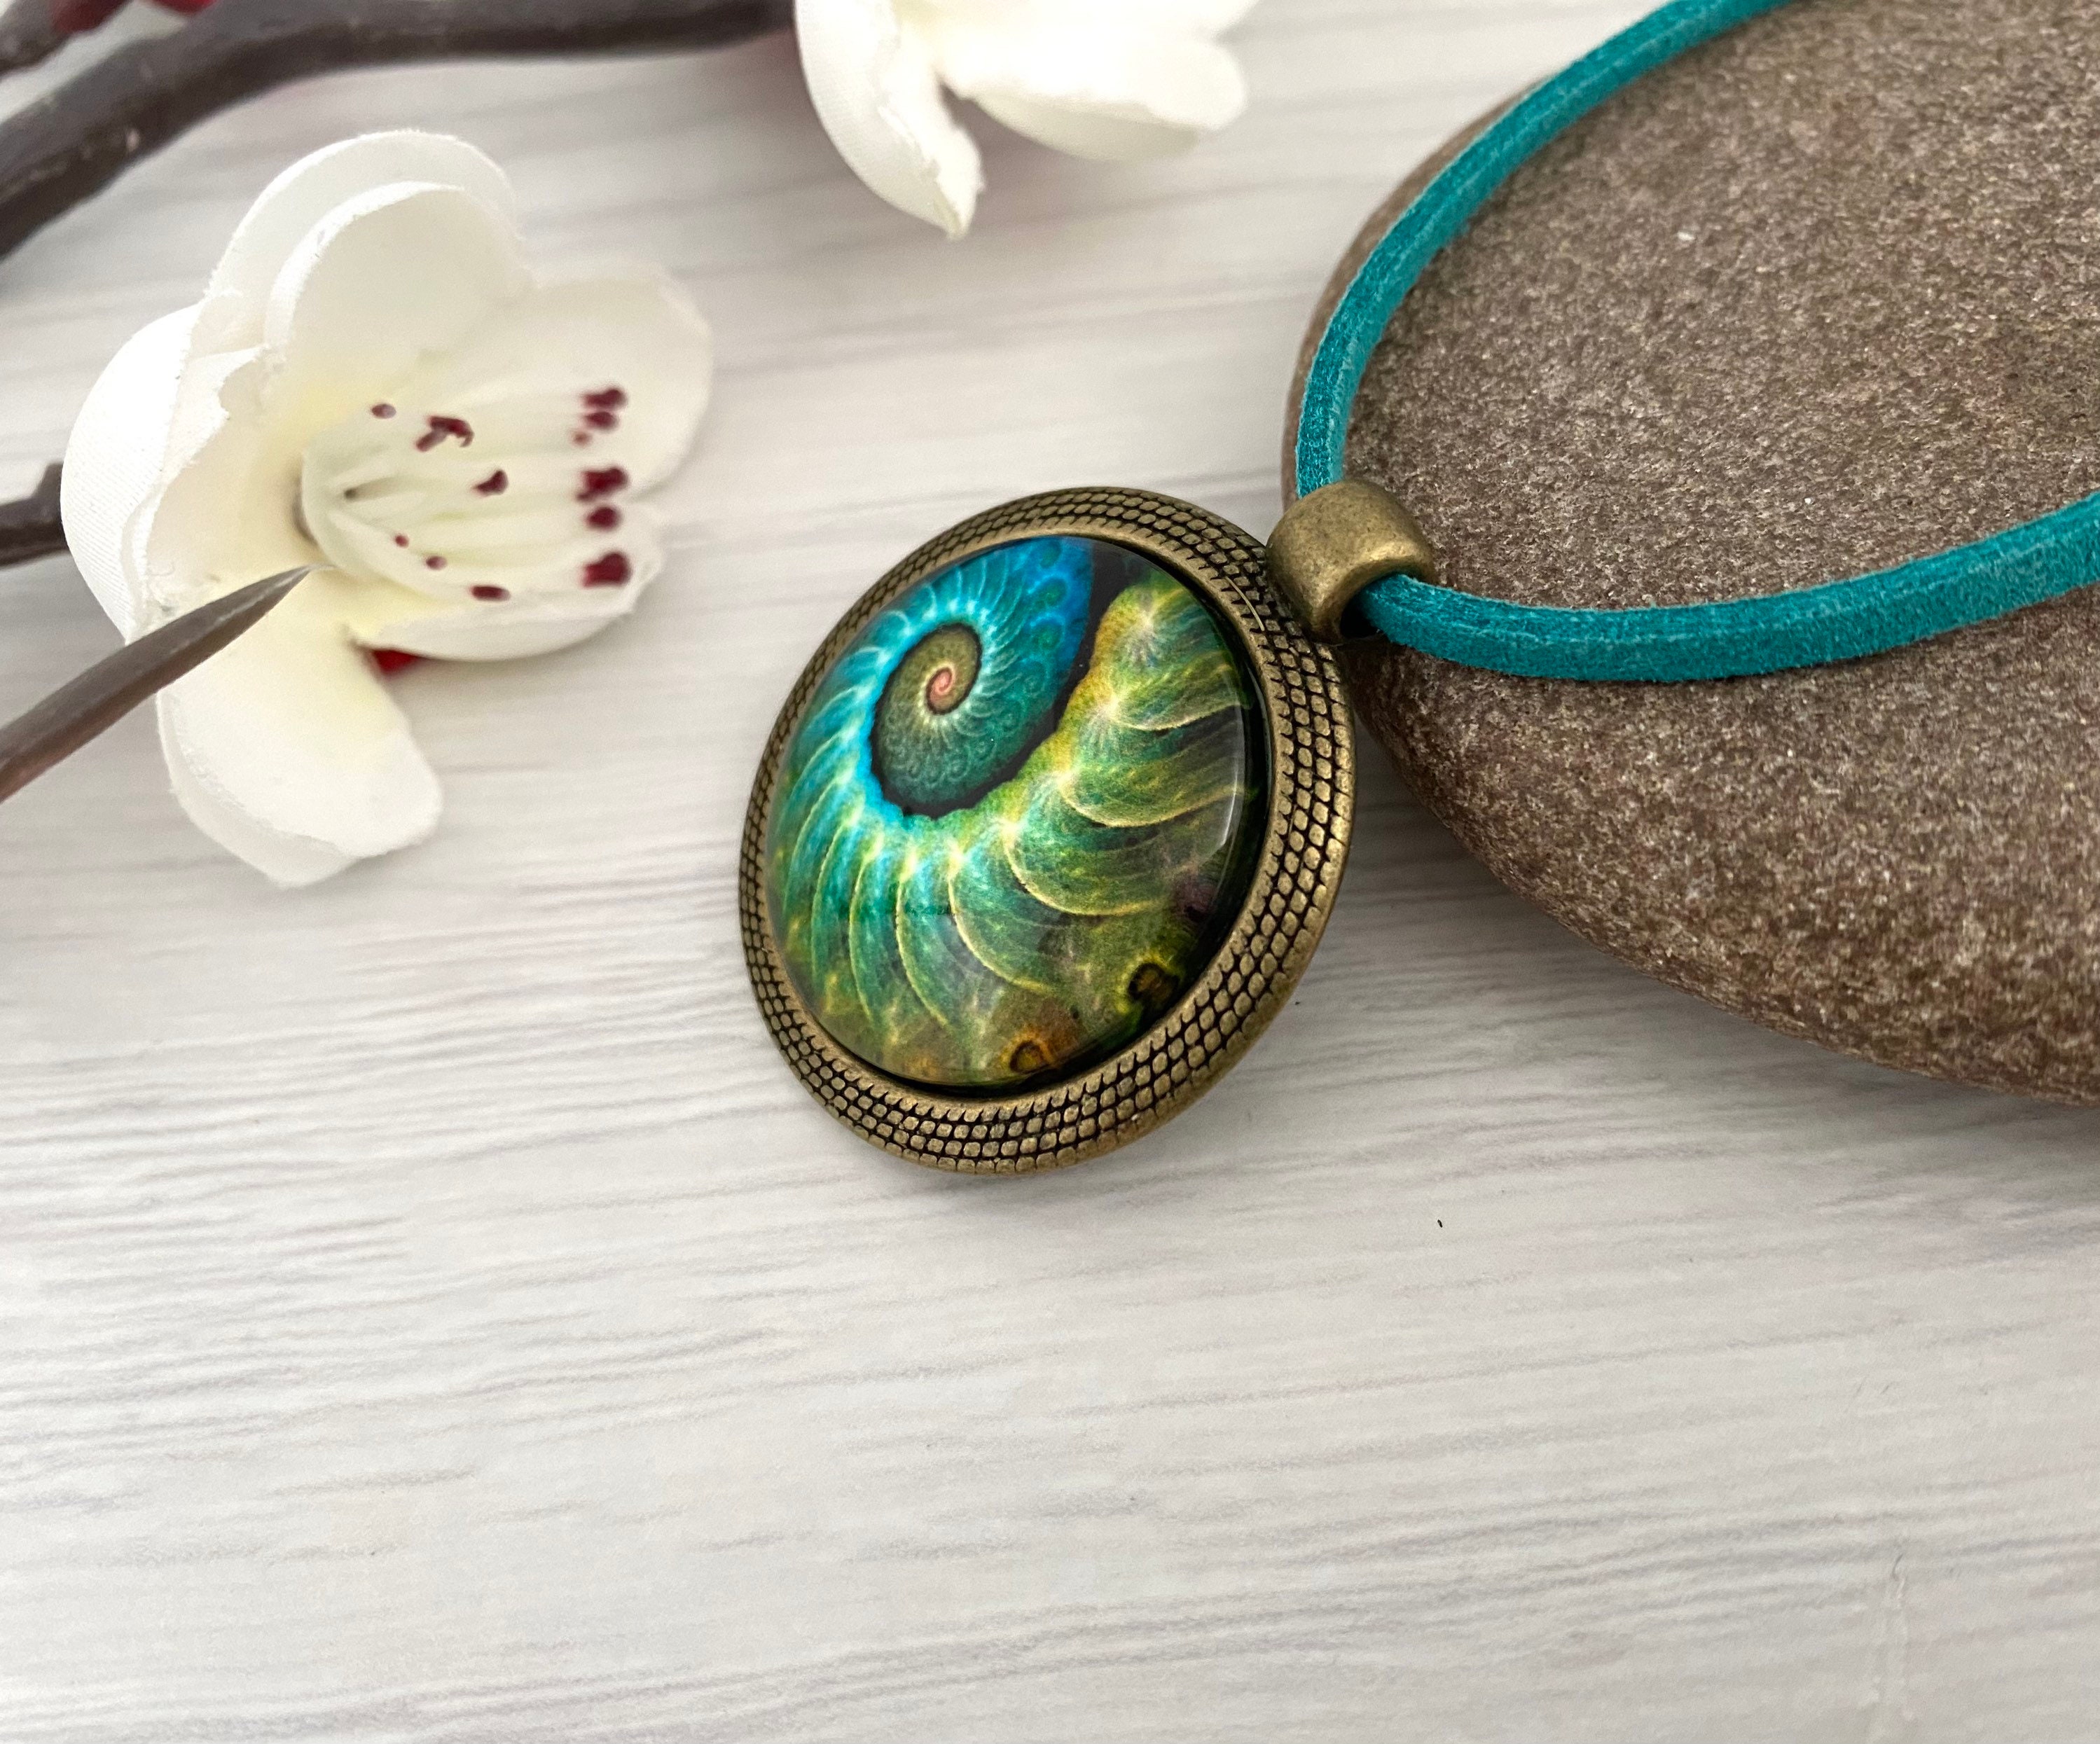 marieappleyarddesign Emerald Green Brooch with Peacock Feather Detail, Brooches for Women in The UK, Silver Round Brooch, Big Bold Jewellery, Gifts for Women